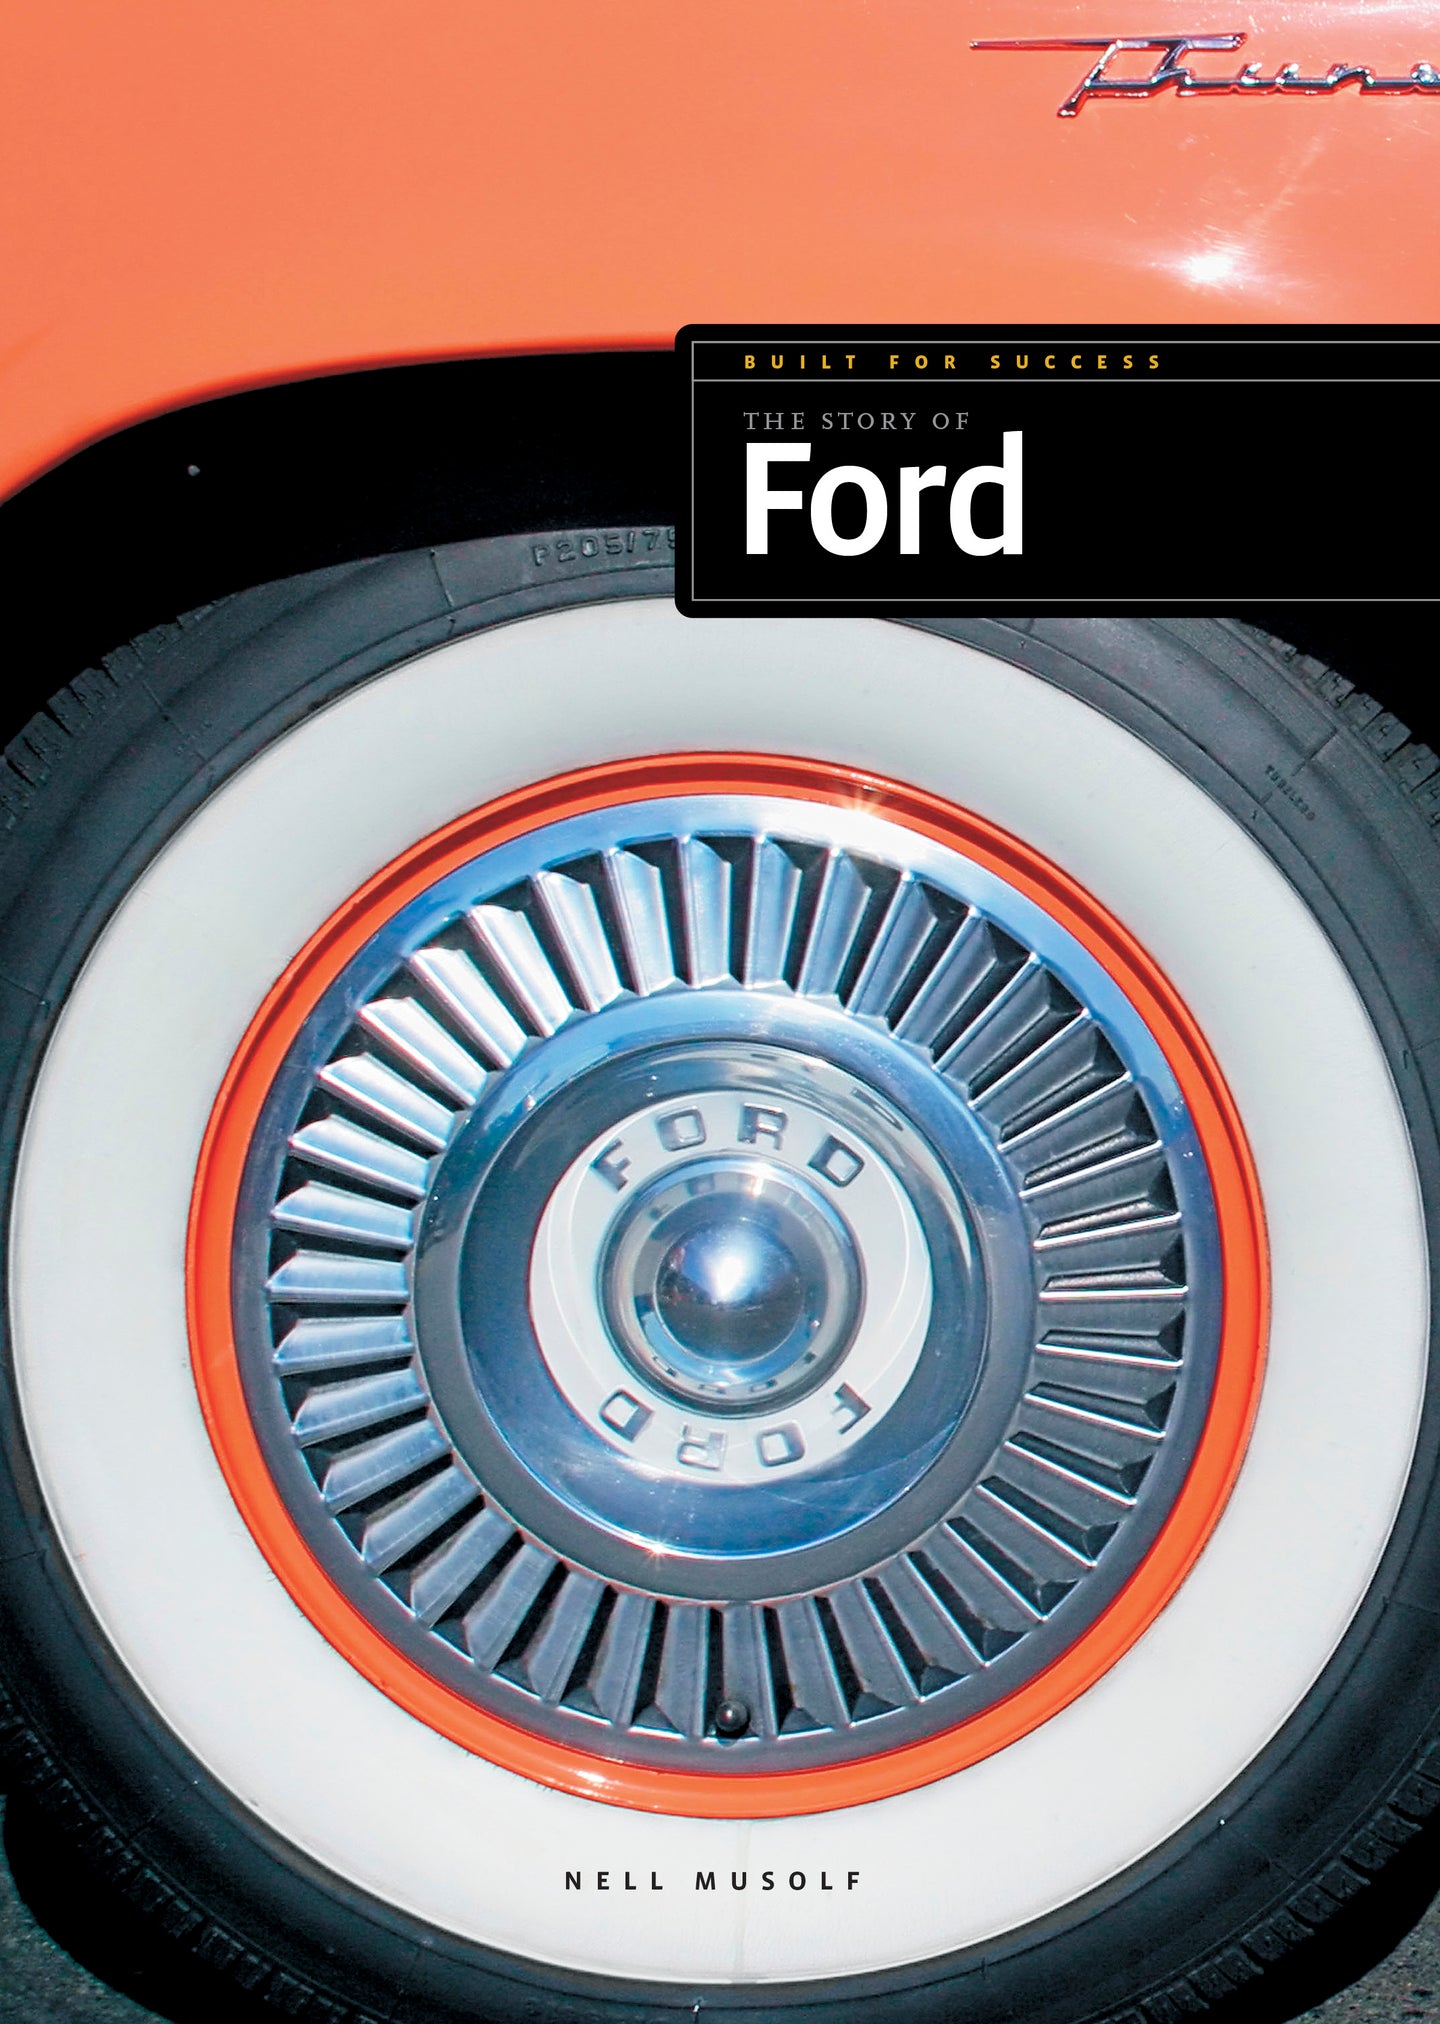 Built for Success: The Story of Ford